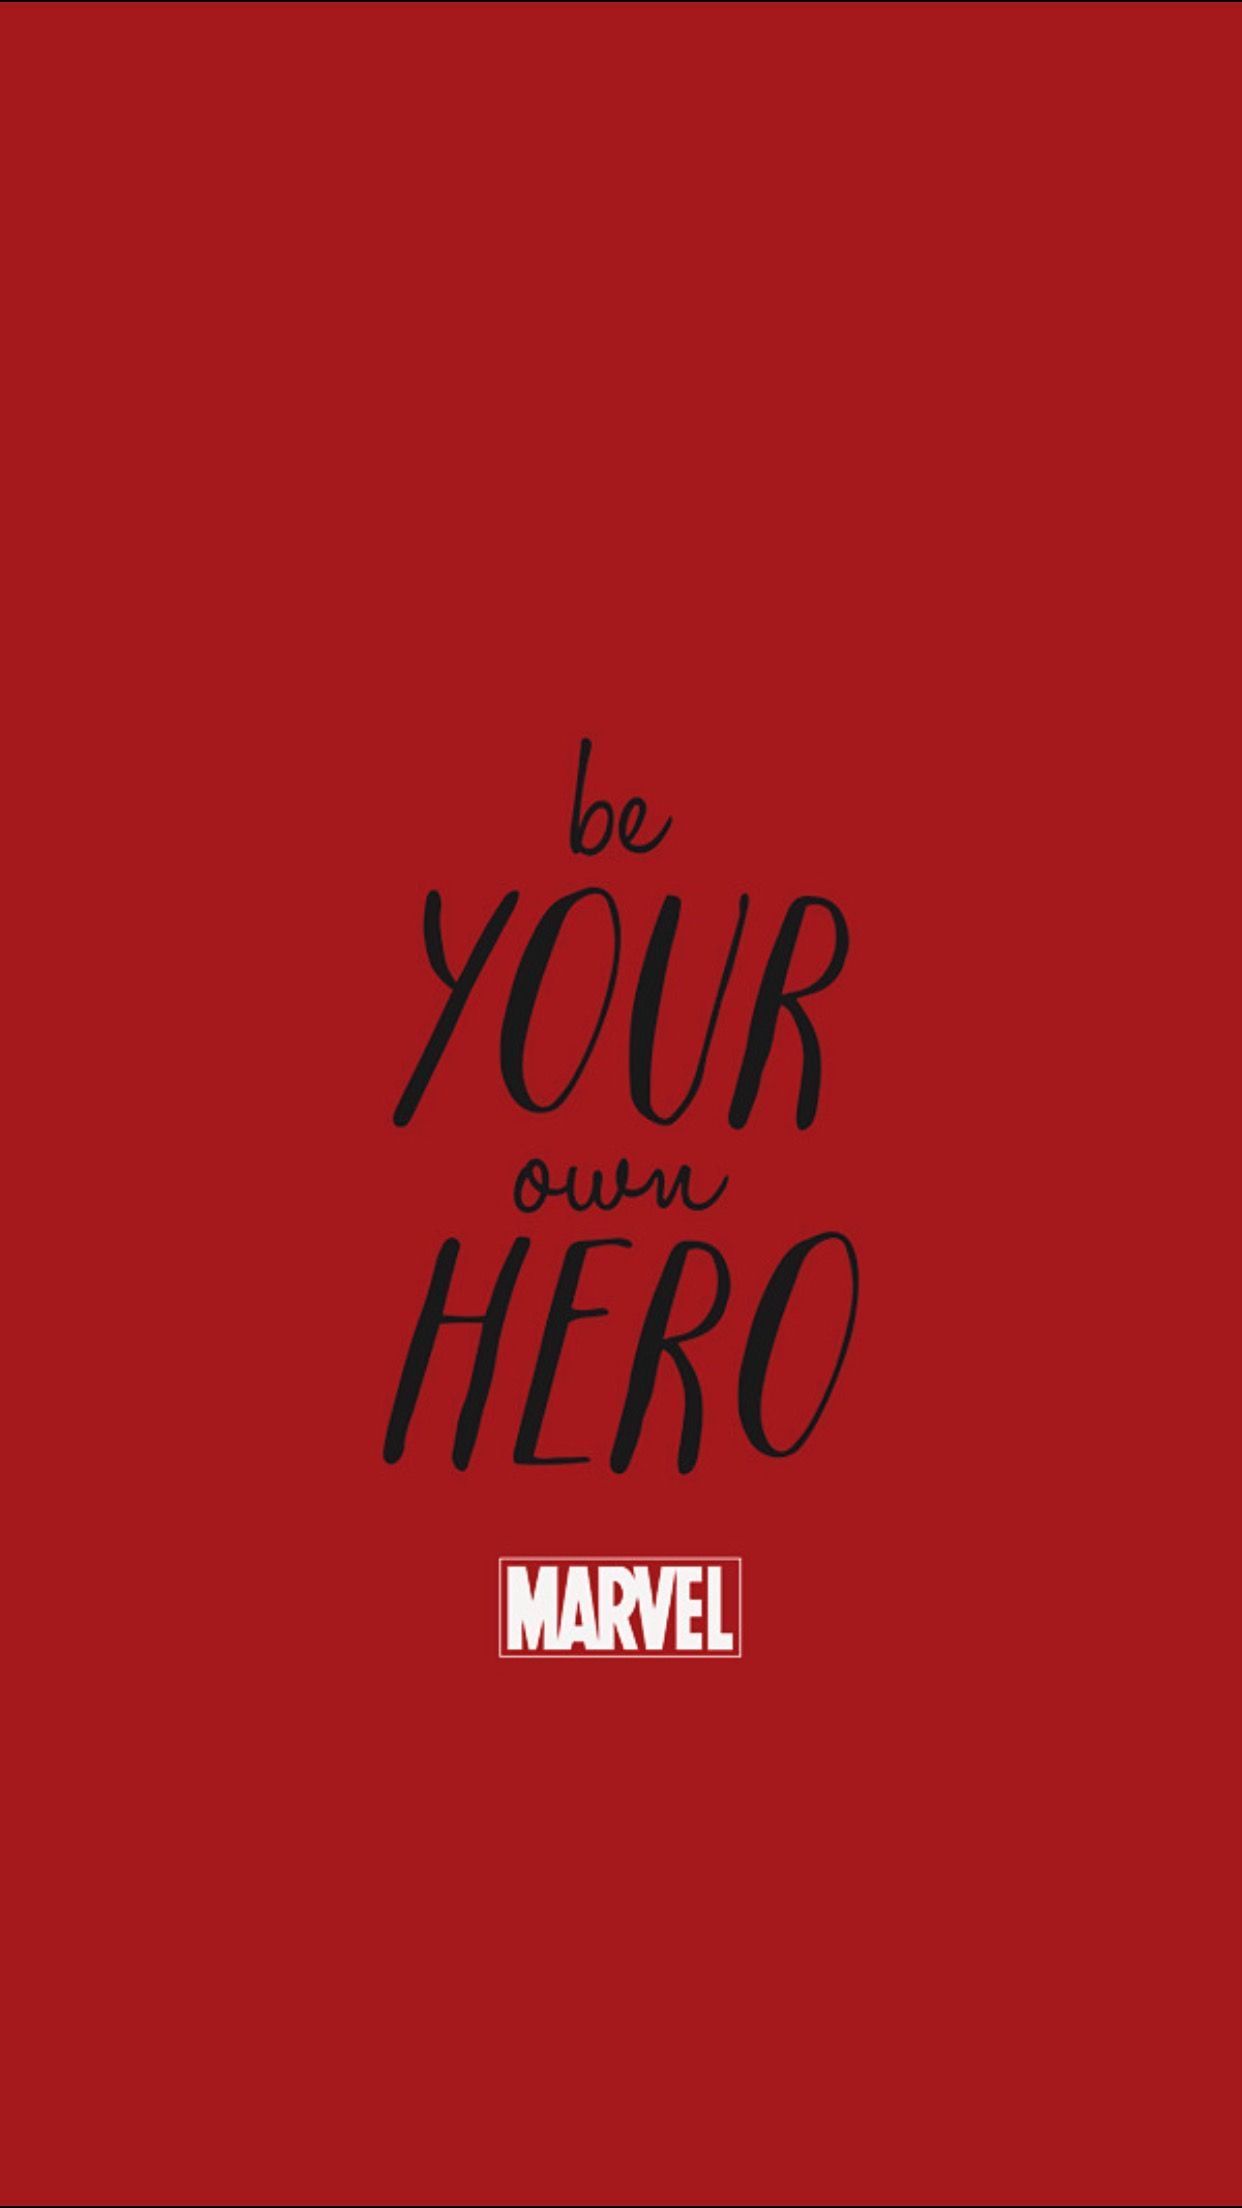 Marvel Movie Wallpaper for iPhone from Uploaded by user. Papel de parede vingadores, Papel de parede marvel, Papel de parede wpp